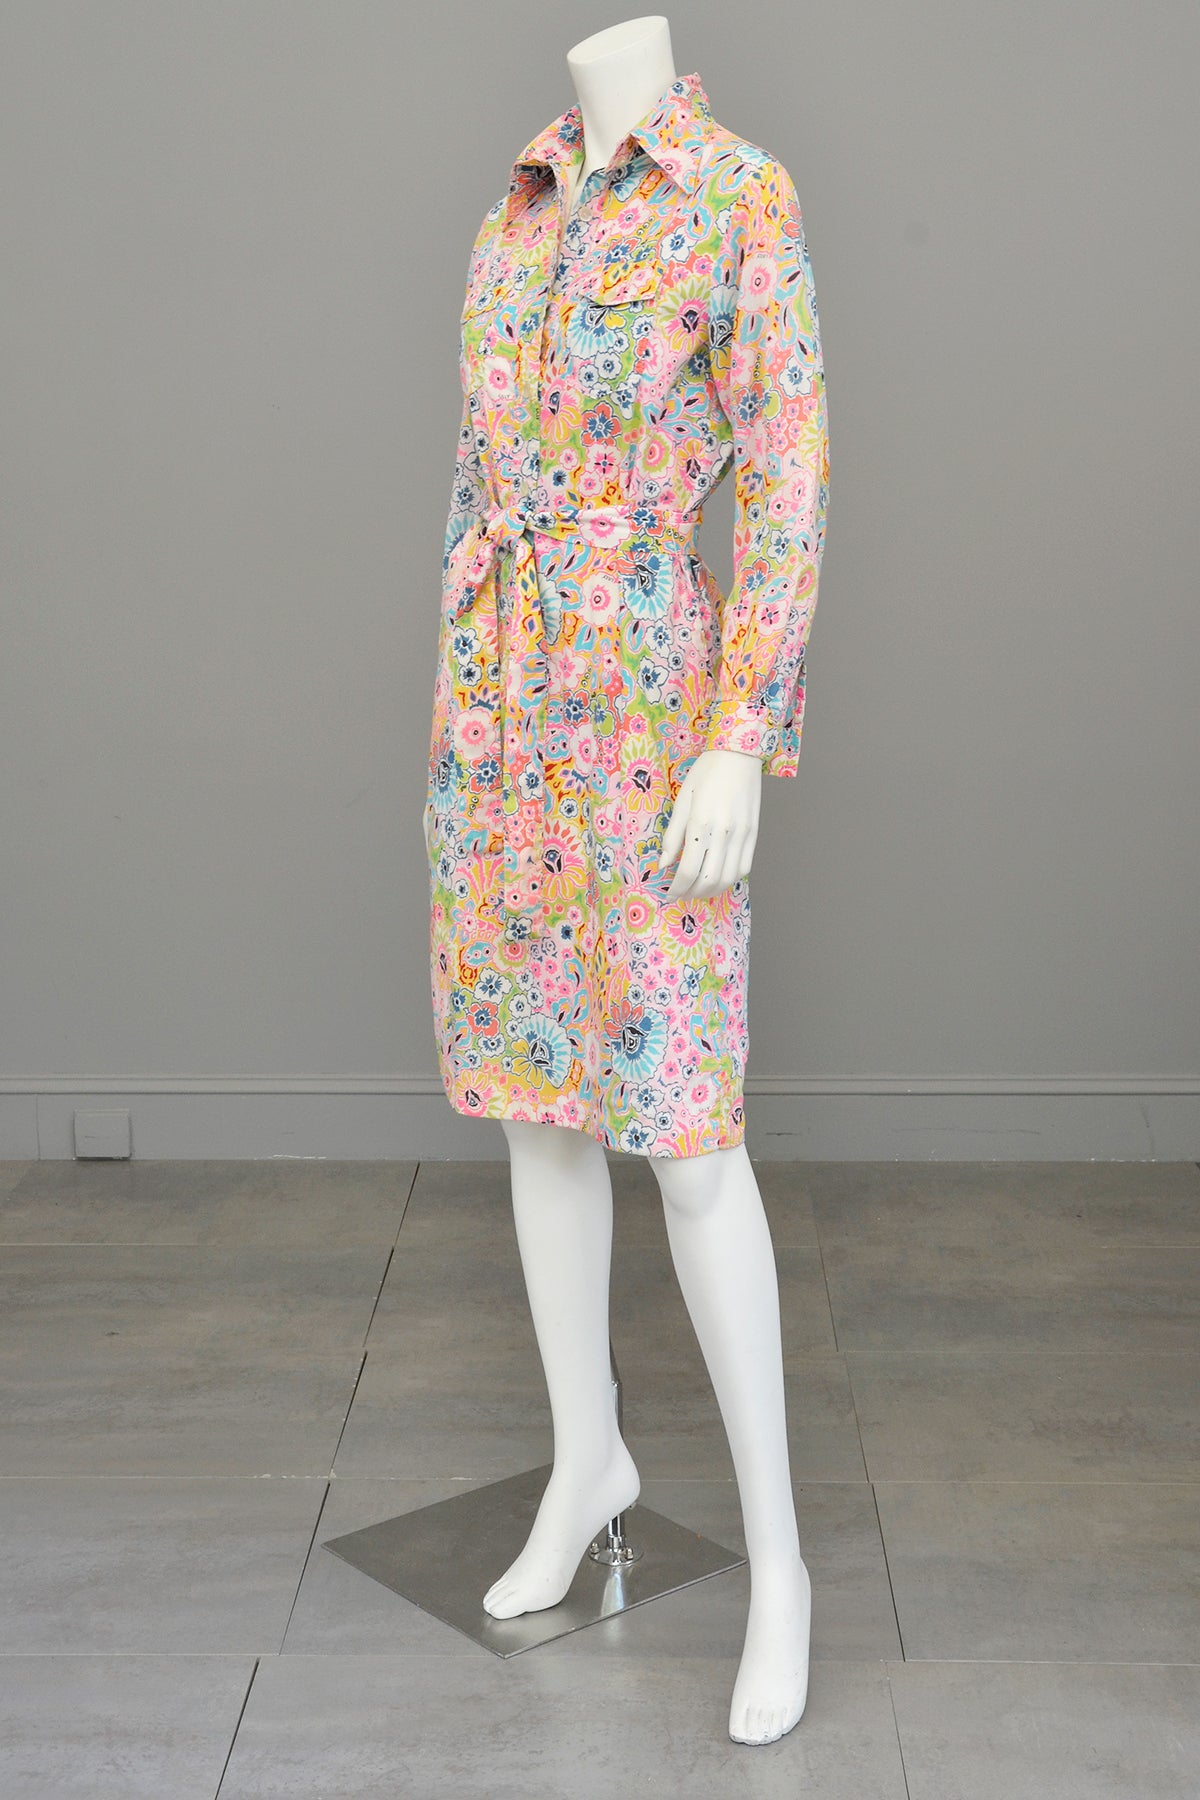 1960s Vintage Lilly Pulitzer Floral Print Button Down Dress | The Lilly Dress